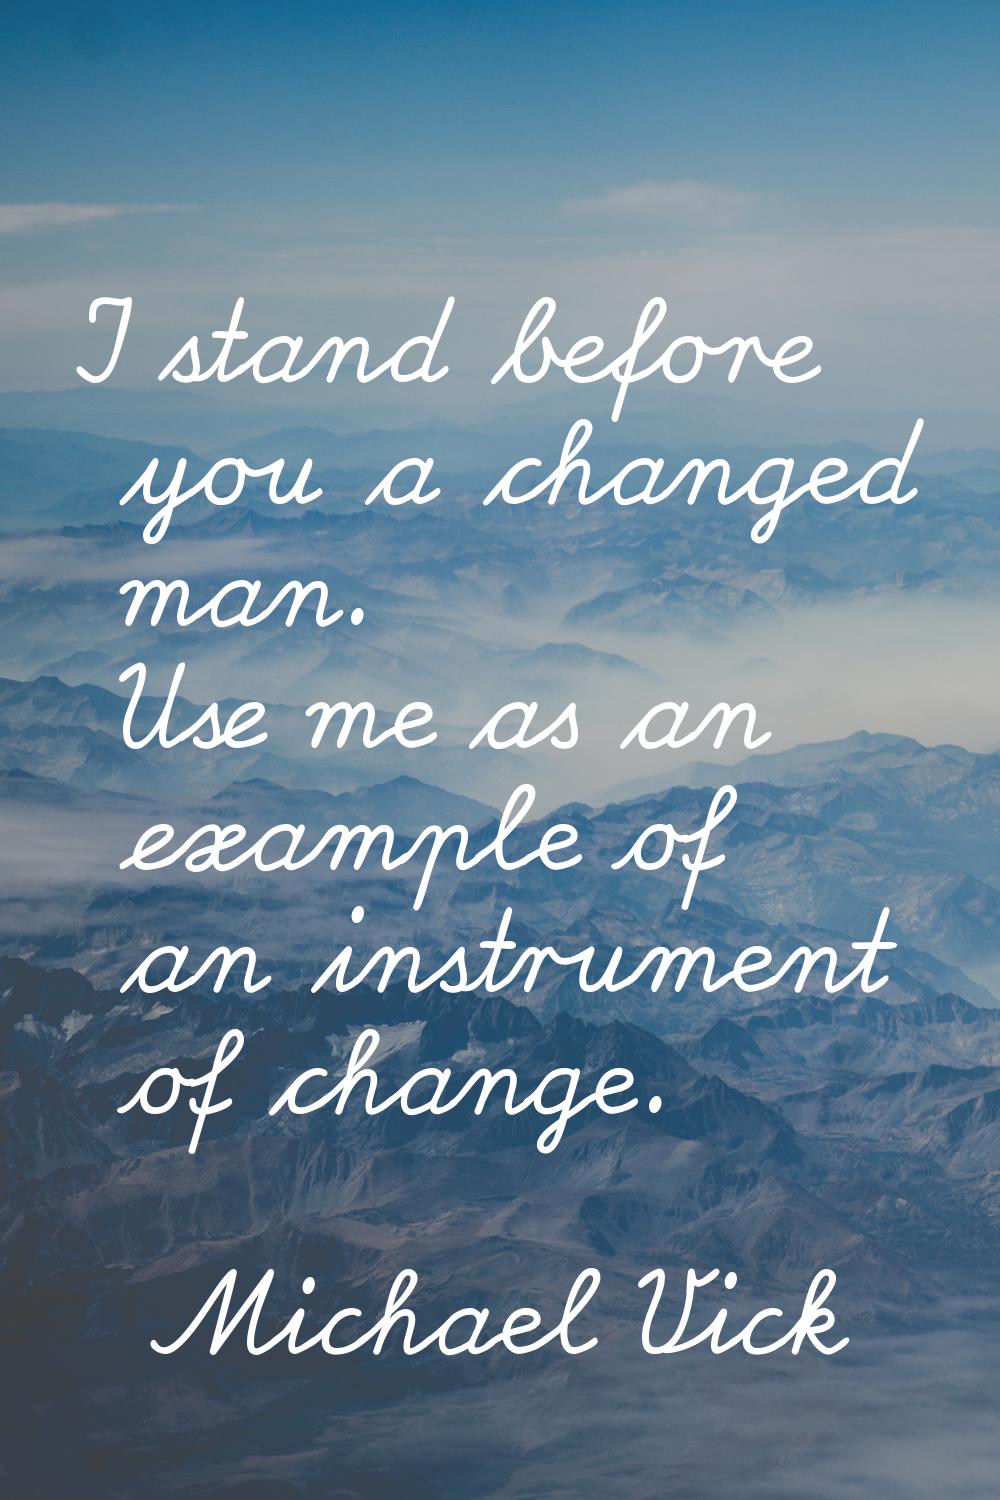 I stand before you a changed man. Use me as an example of an instrument of change.